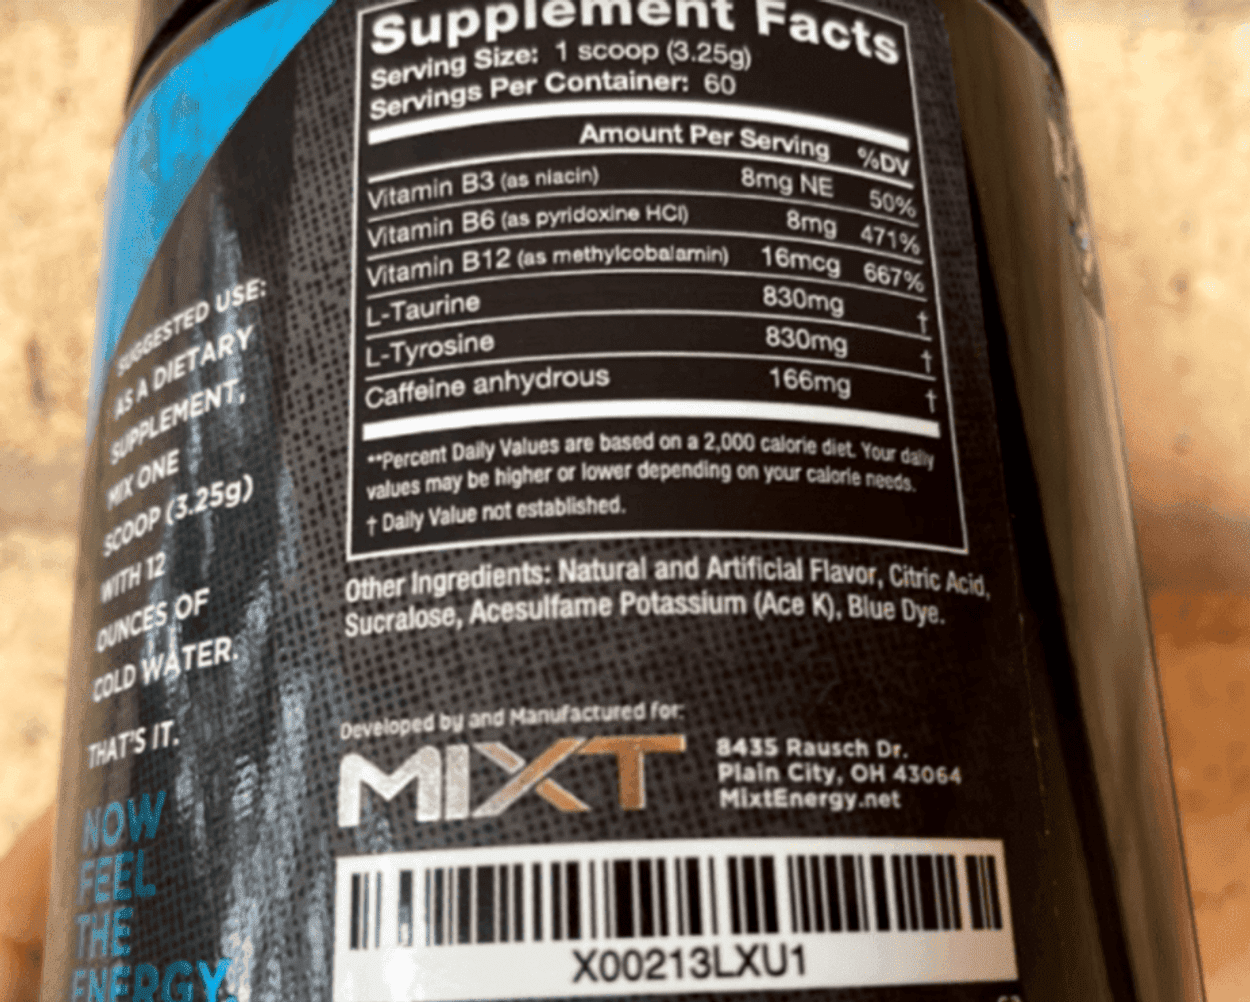 Supplement facts of Mixt Energy.